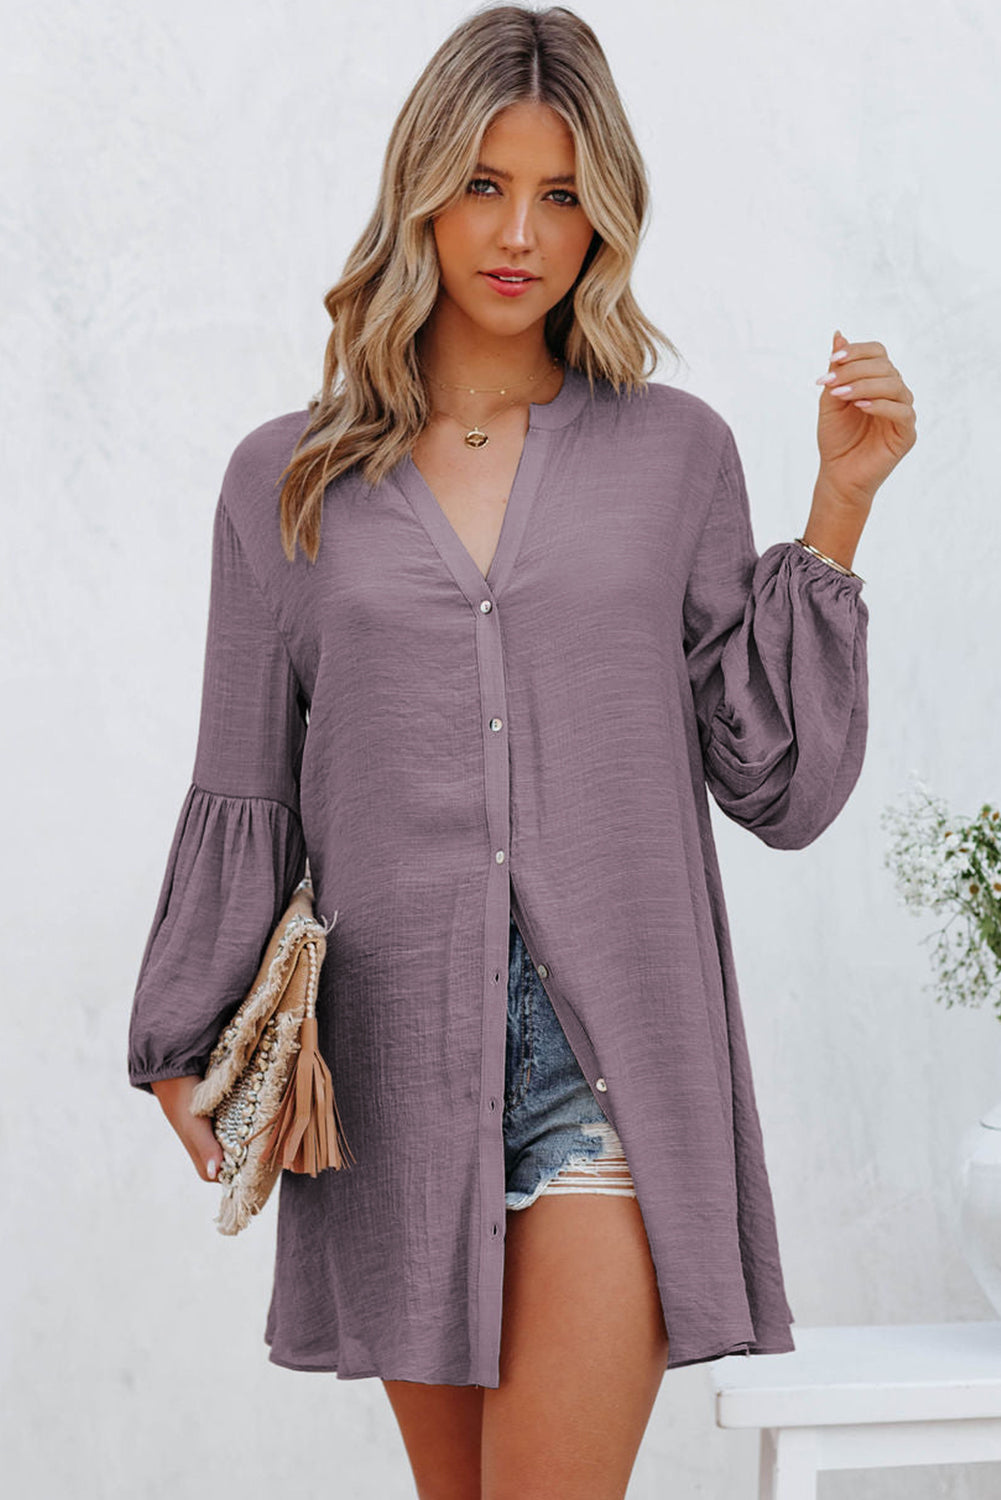 LC2552553-8-S, LC2552553-8-M, LC2552553-8-L, LC2552553-8-XL, LC2552553-8-2XL, Purple Womens Long Sleeve Oversized Blouses Tops Button Up Bishop Sleeve Shirt